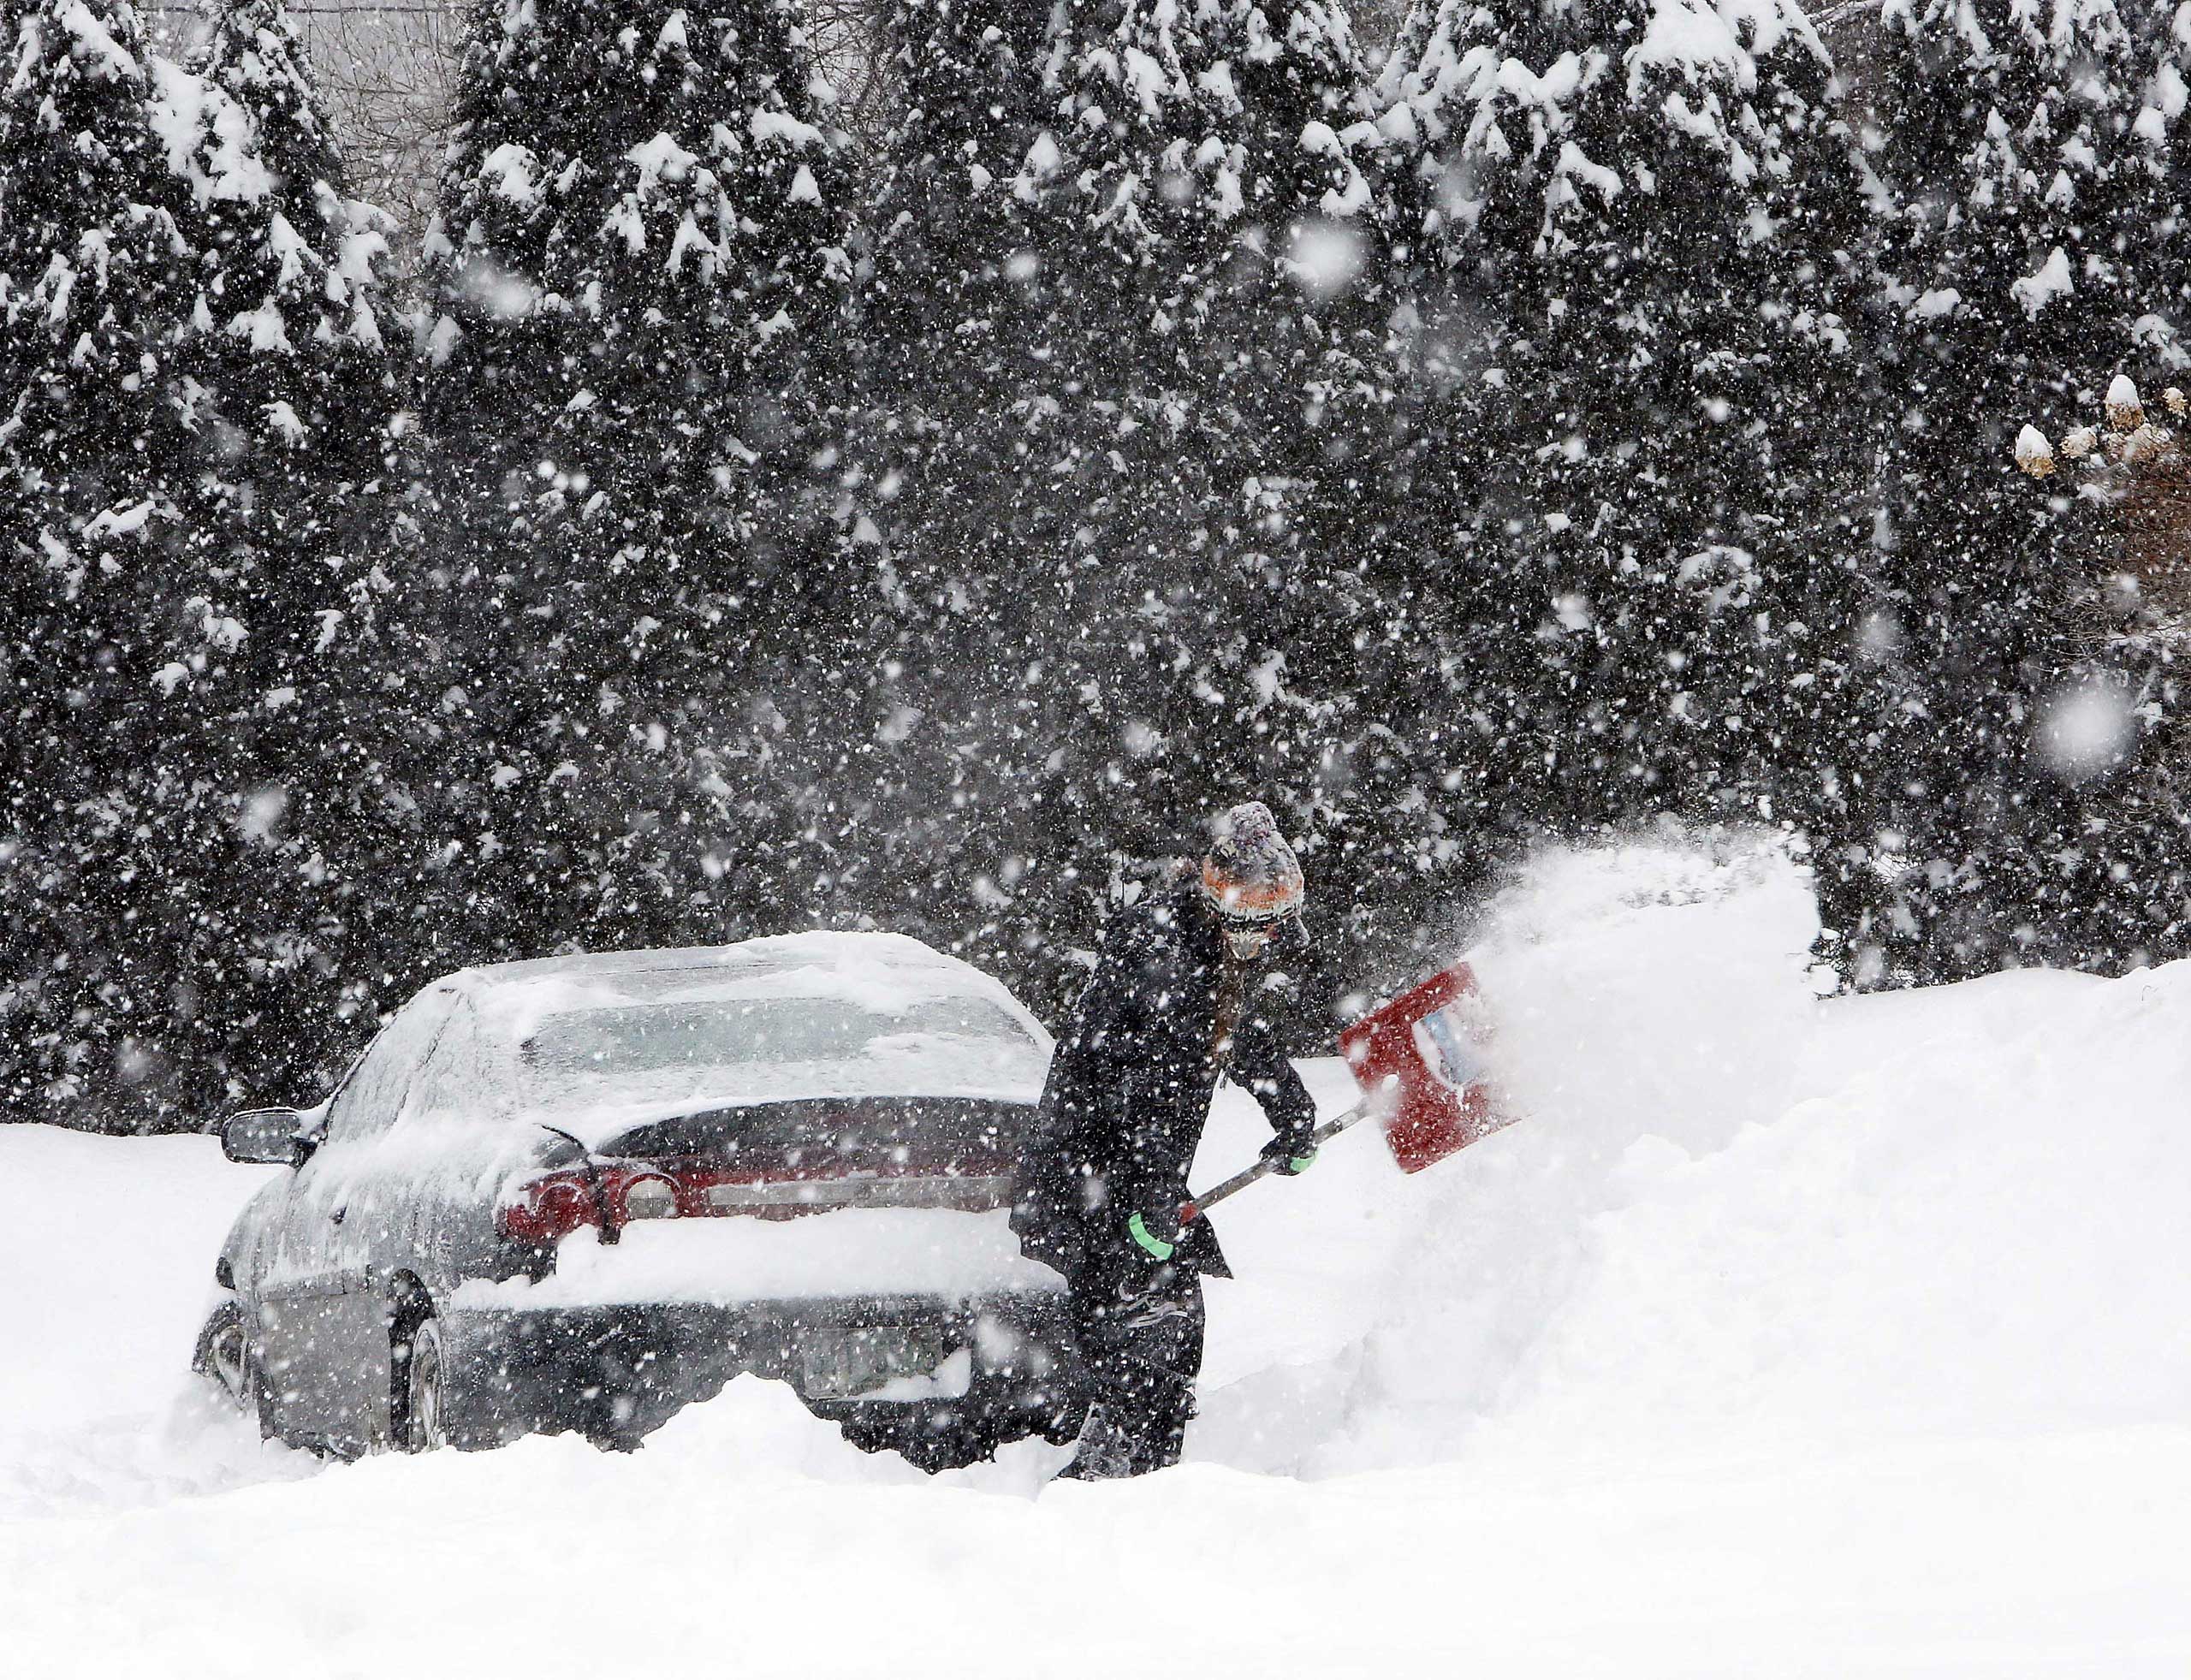 Krystal Koban removes snow from around her car during a winter storm, Monday, Feb. 2, 2015, in Henniker, N.H. (Jim Cole—AP)